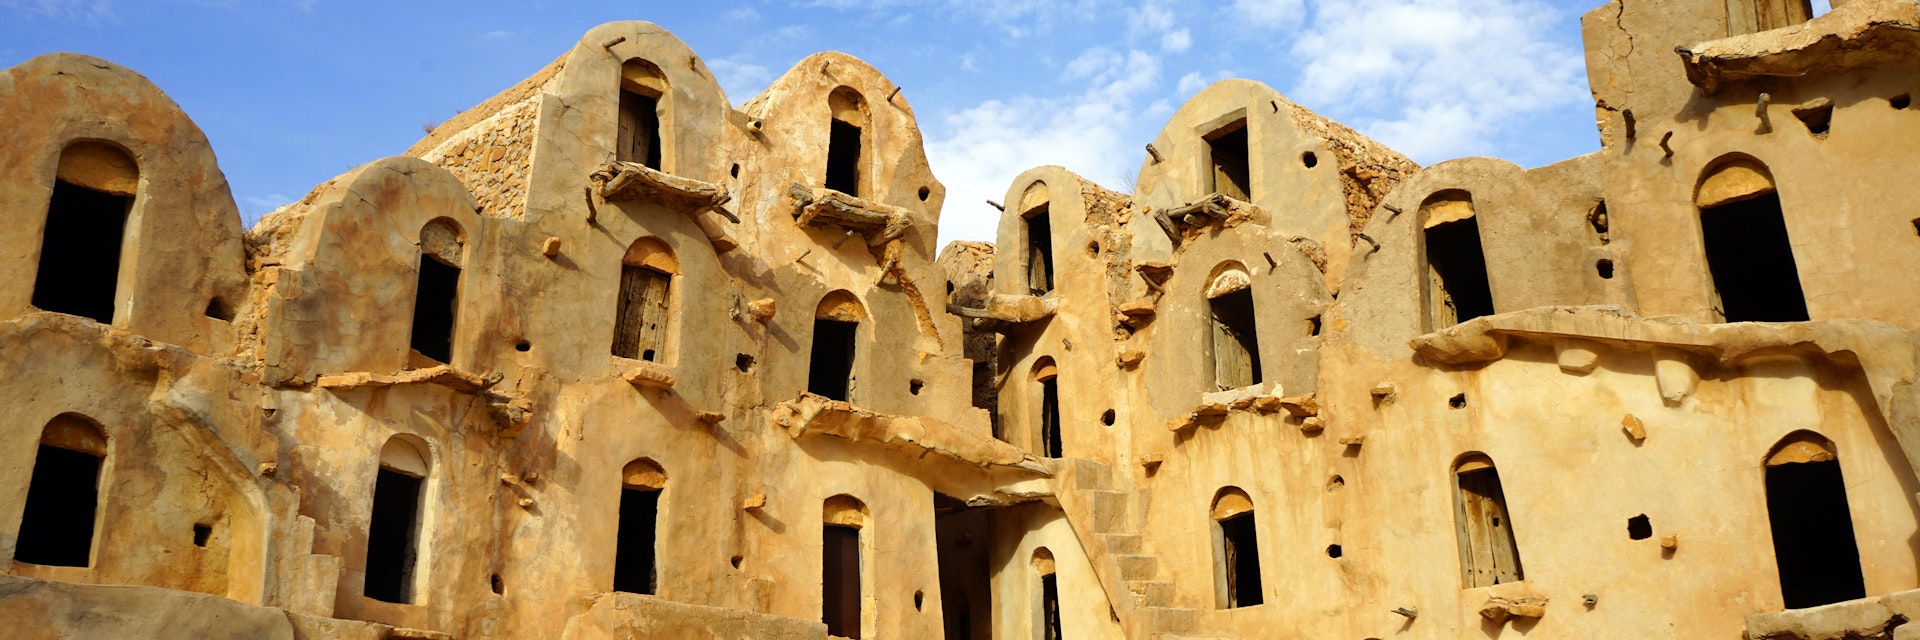 Ksar Ezzahra, Tataouine, southern Tunisia; Shutterstock ID 671436523; Your name (First / Last): Lauren Keith; GL account no.: 65050; Netsuite department name: Online Editorial; Full Product or Project name including edition: Tunisia Destination Page image update